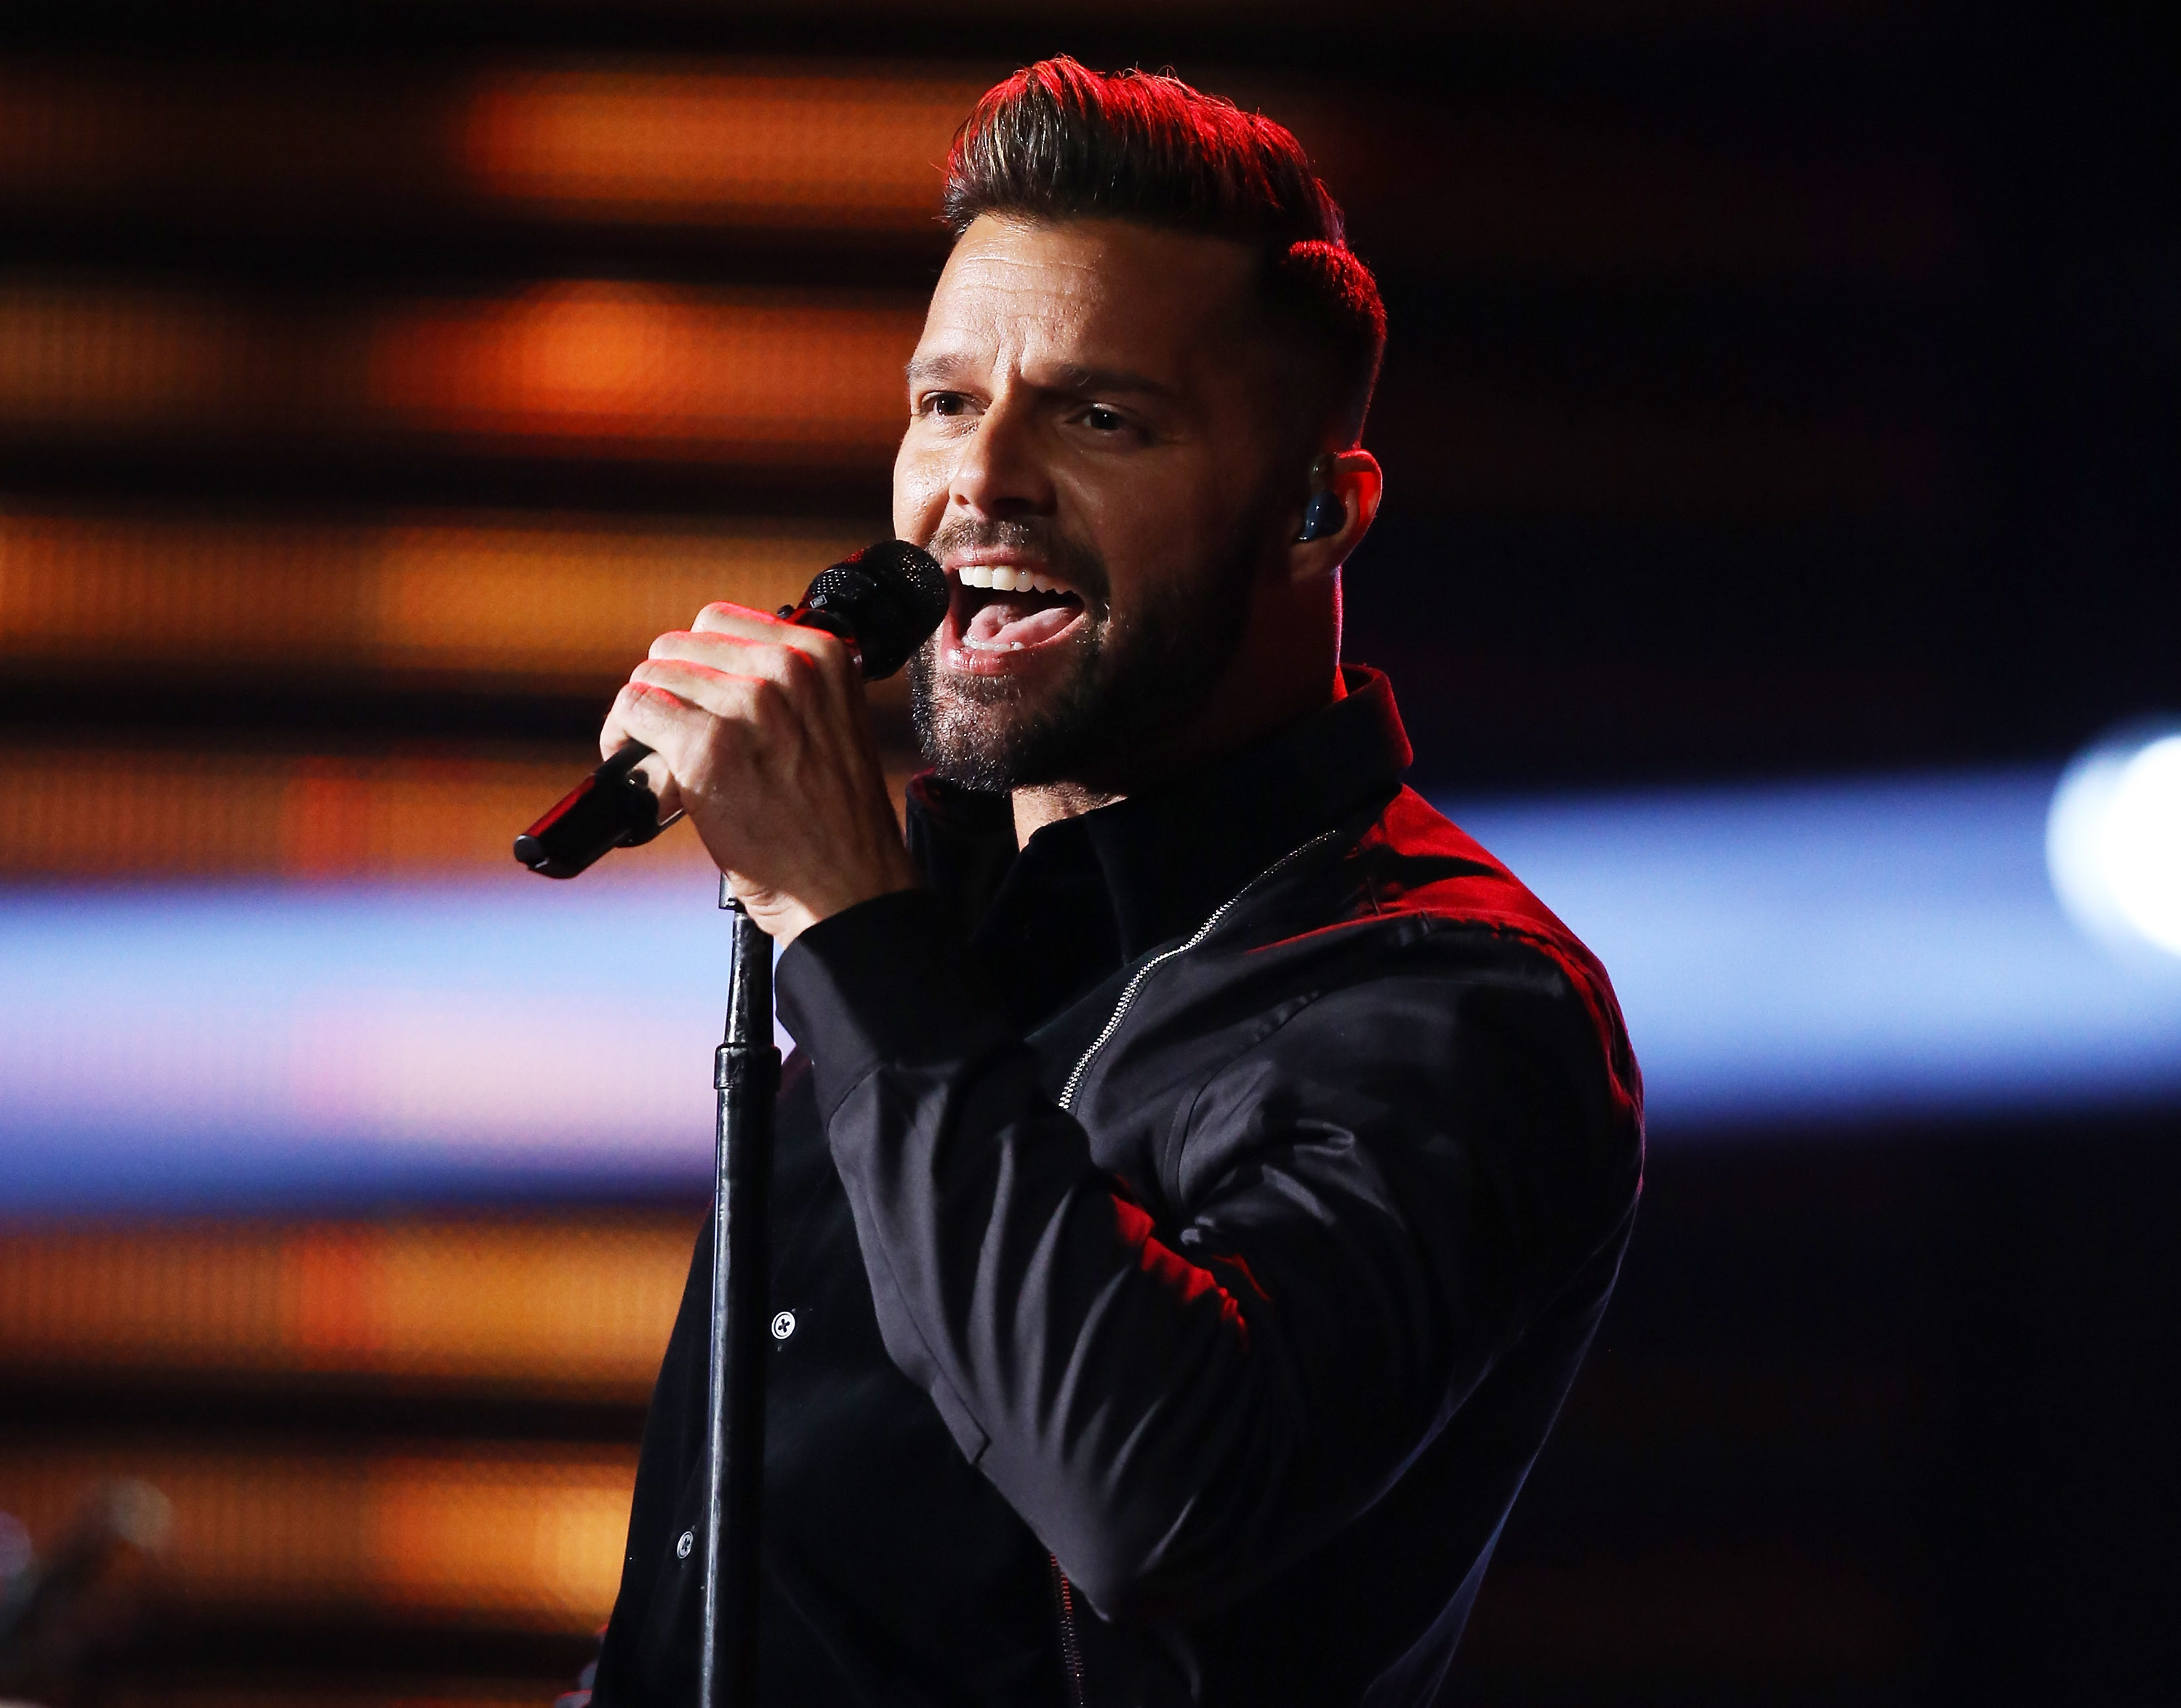 The Most Influential Artists: #27 Ricky Martin